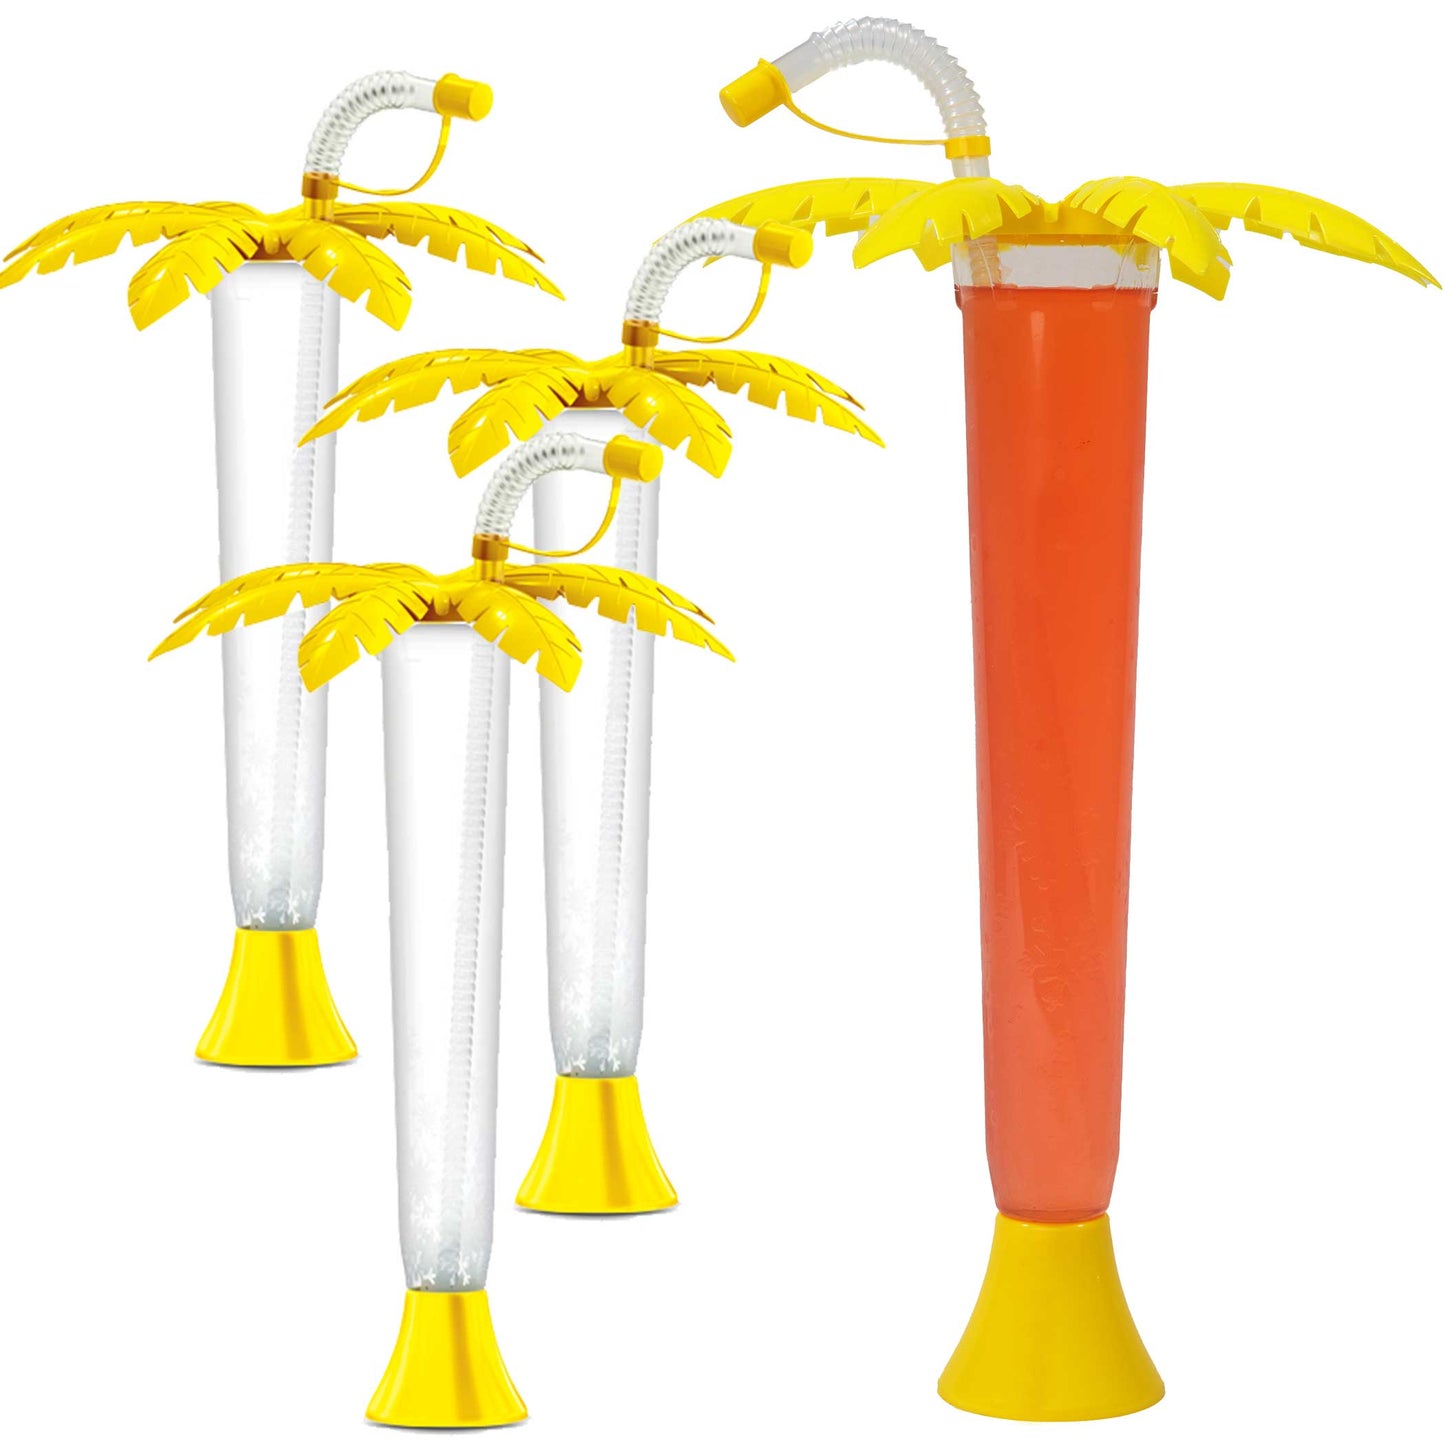 Sweet World USA Yard Cups 108 Palm Tree Luau Yard Cups (108 cups) - for Margaritas, Cold Drinks, Frozen Drinks, Kids Parties - 14 oz. (400 ml) - Yellow Palm cups with lids and straws